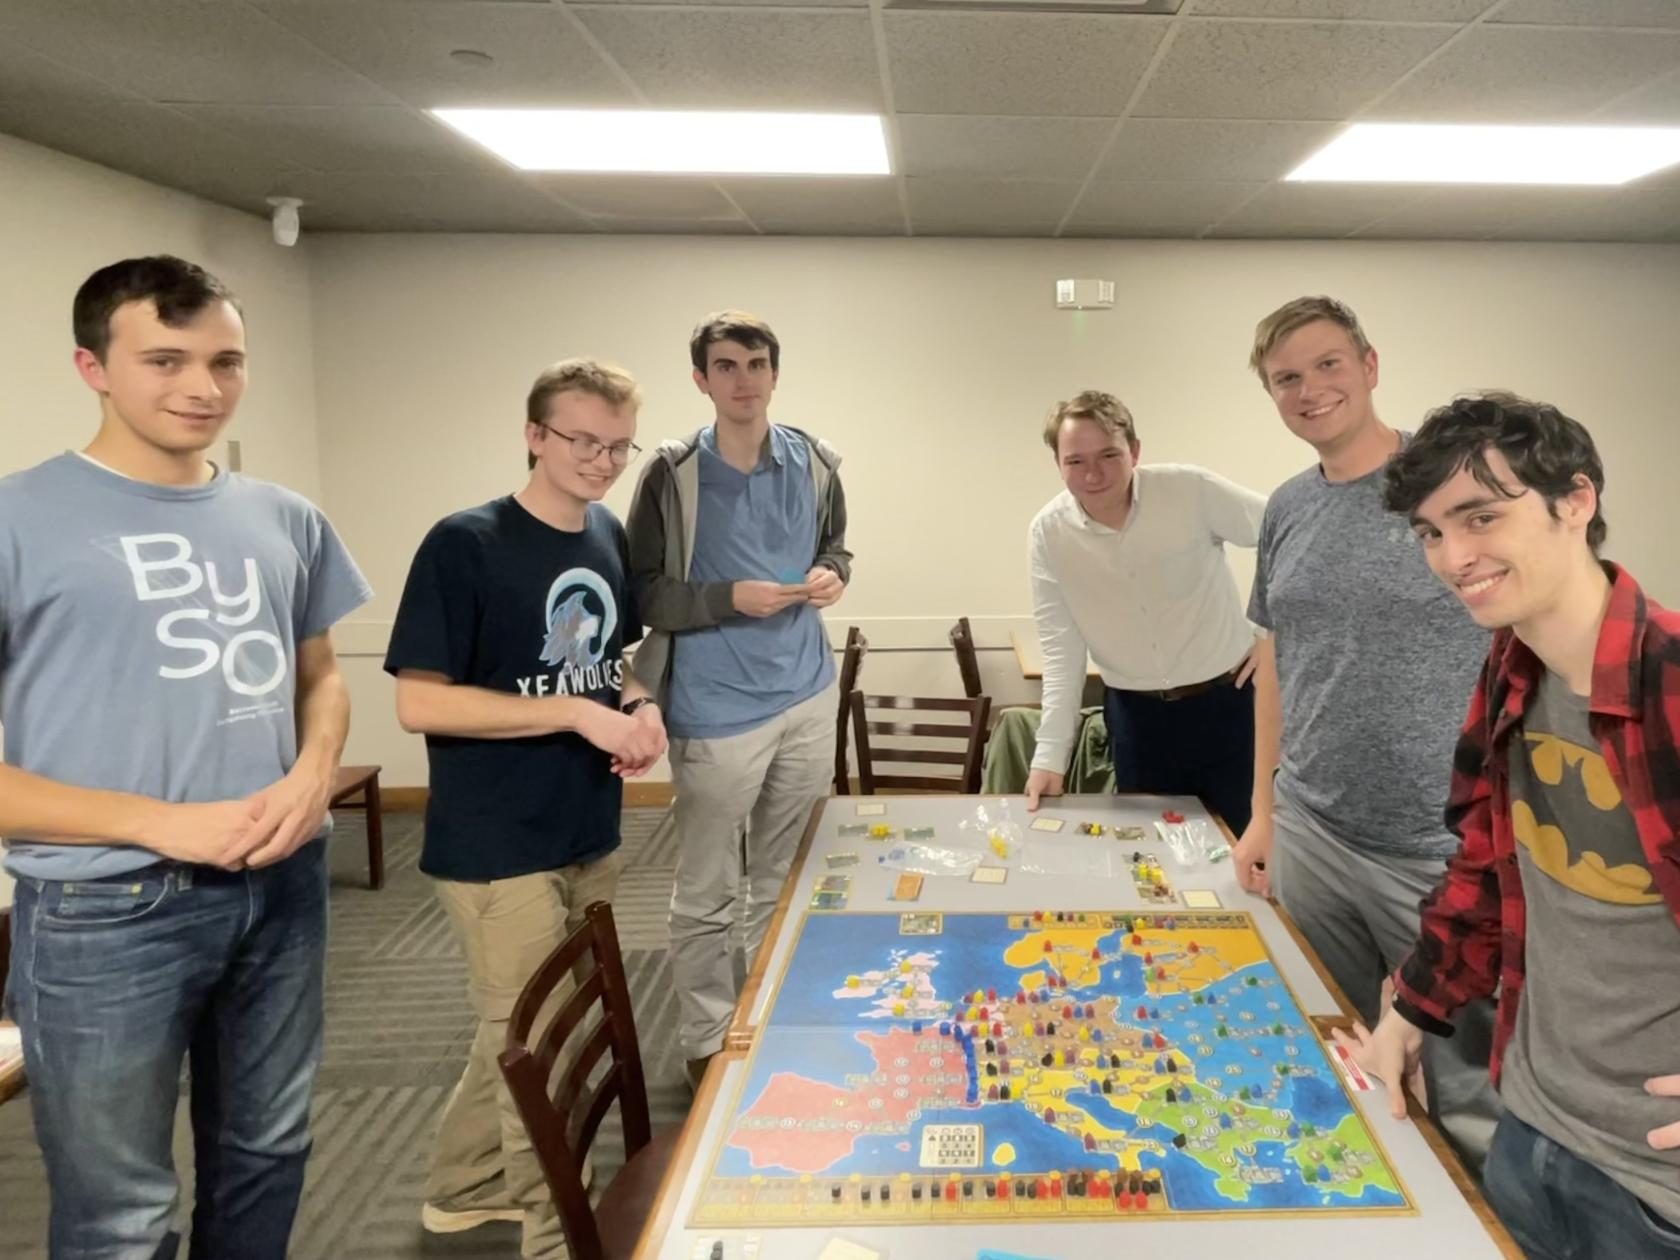 Members of the Chi Epsilon Delta Wolves at a board game activity. Pictured left to right is Benjamin Hyink, Benjamin Ewing, Caleb McGinnis, Ethan House, Sam Ingersoll and Ethan Collins. / Provided by XED Wolves